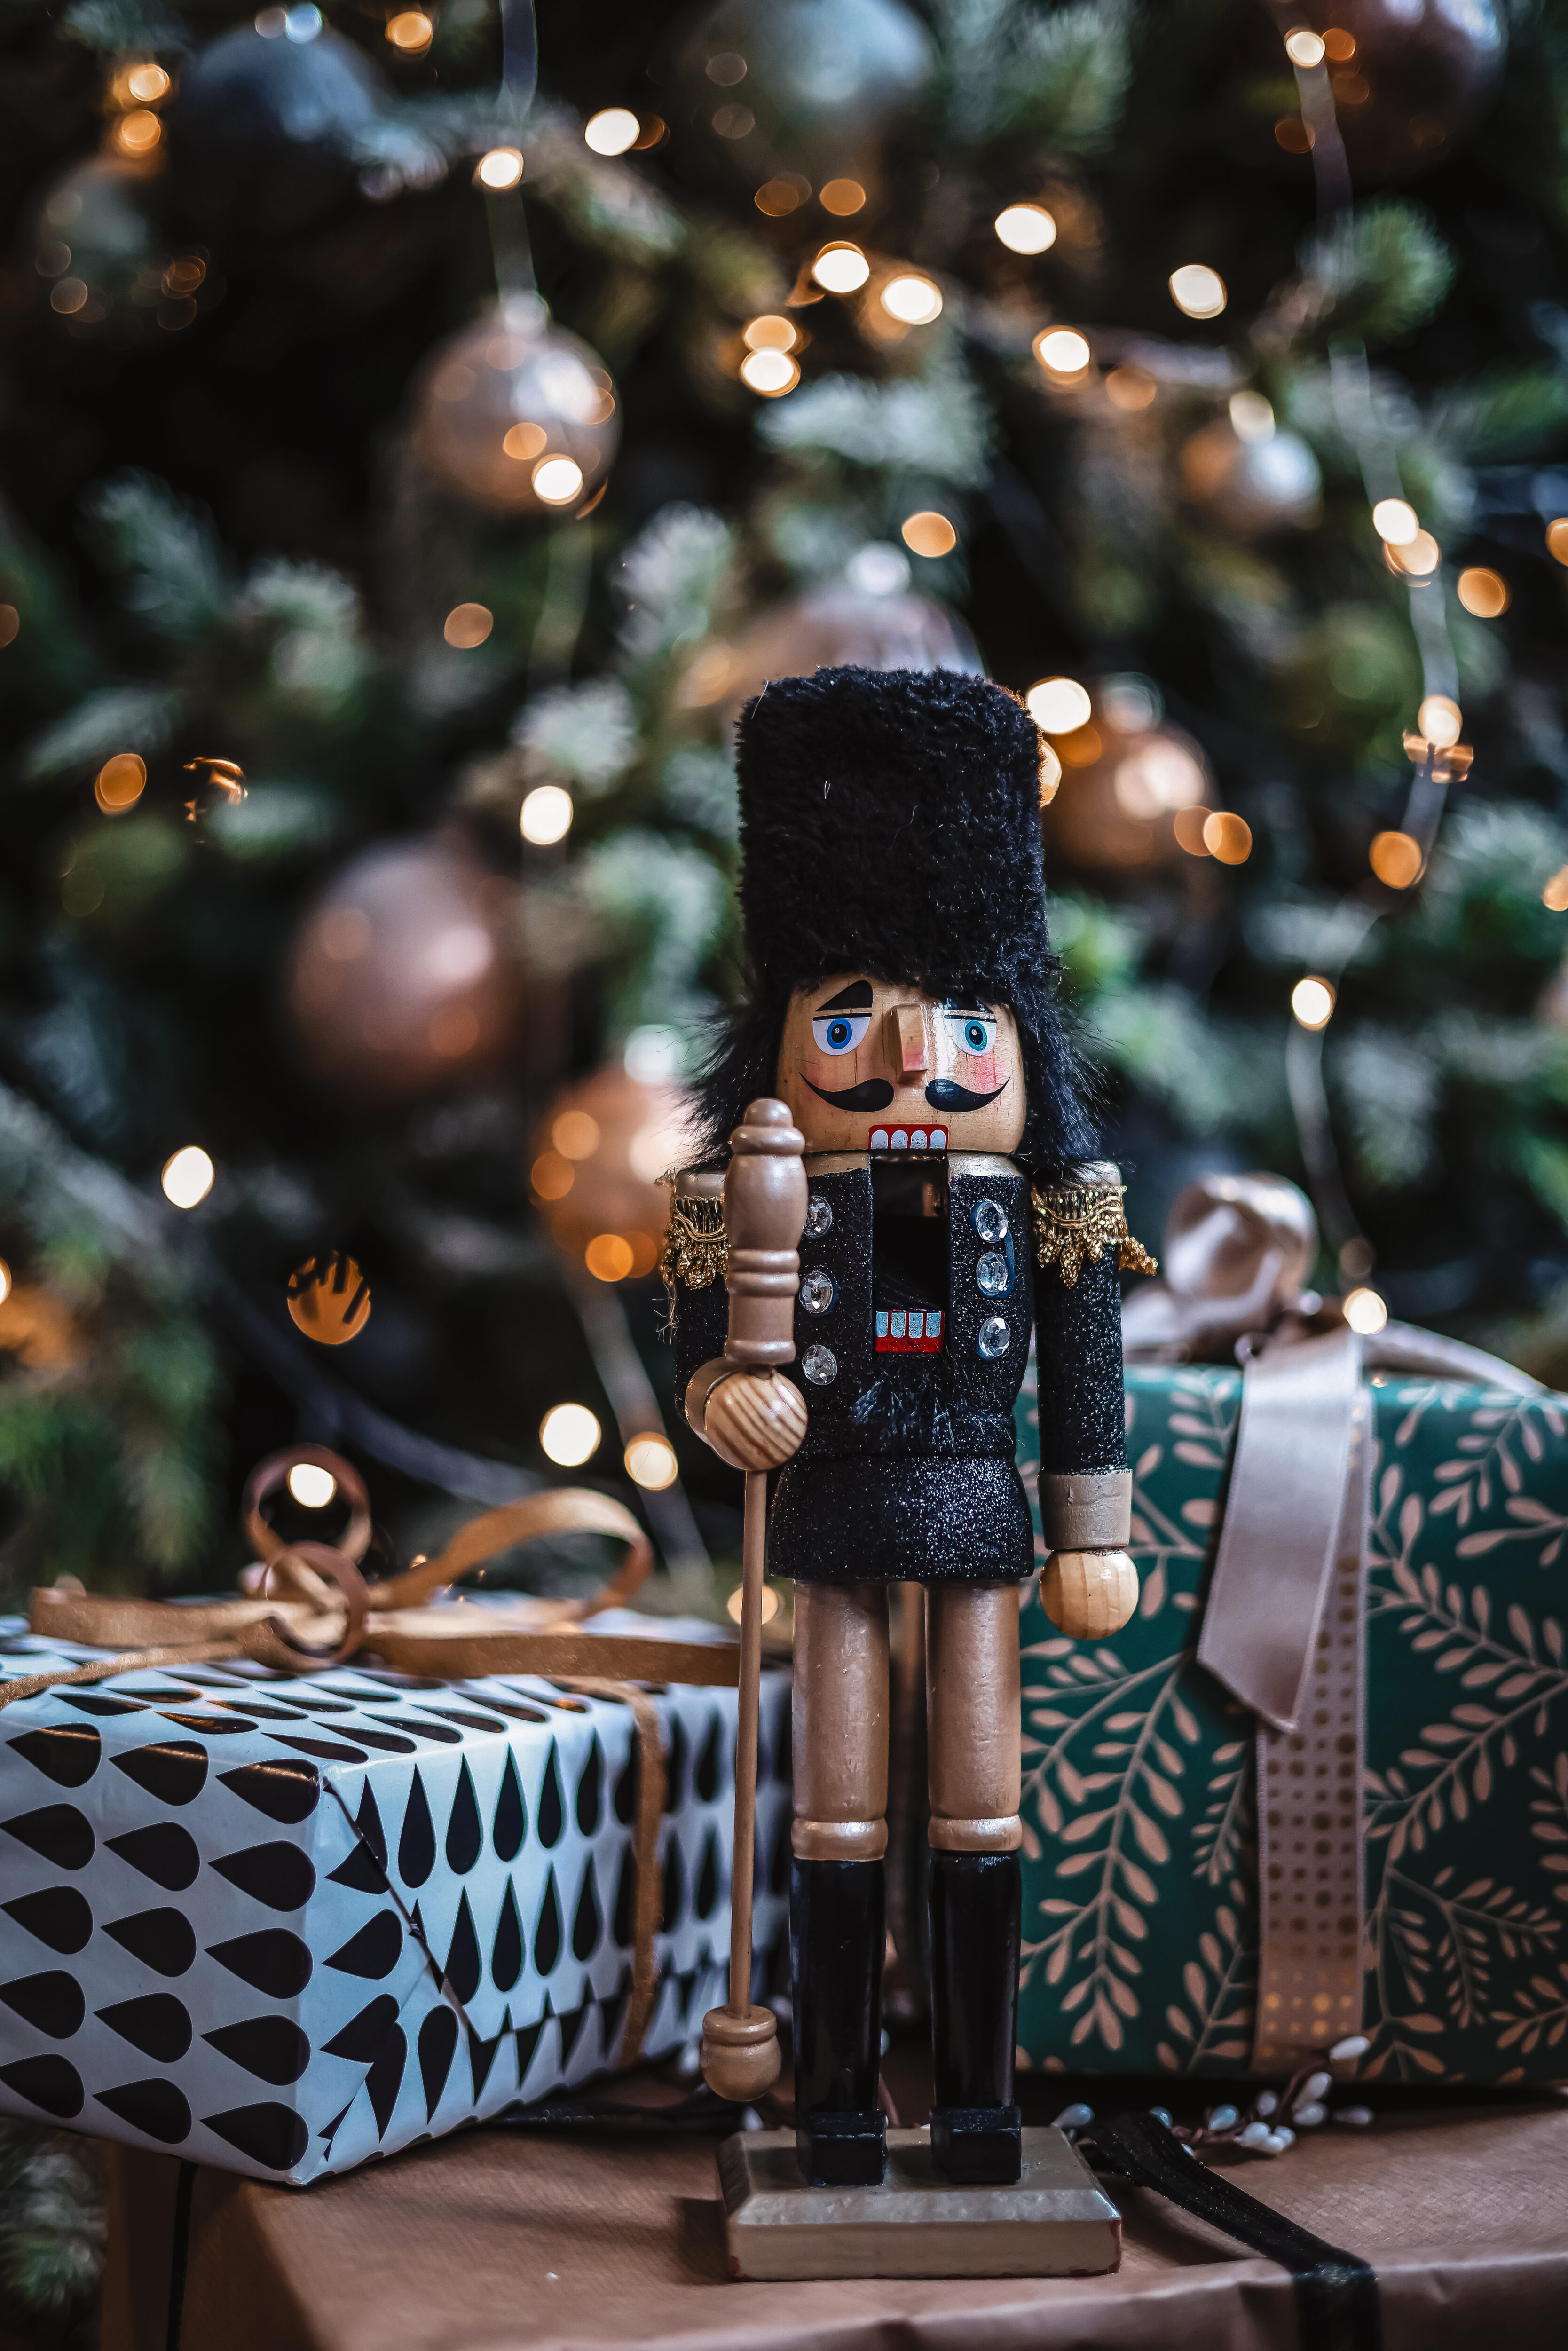 A nutcracker is placed in front of a beautiful illuminated Christmas tree with wrapped gifts. This year, I'm giving you 25 Christmas gift ideas everyone will love.